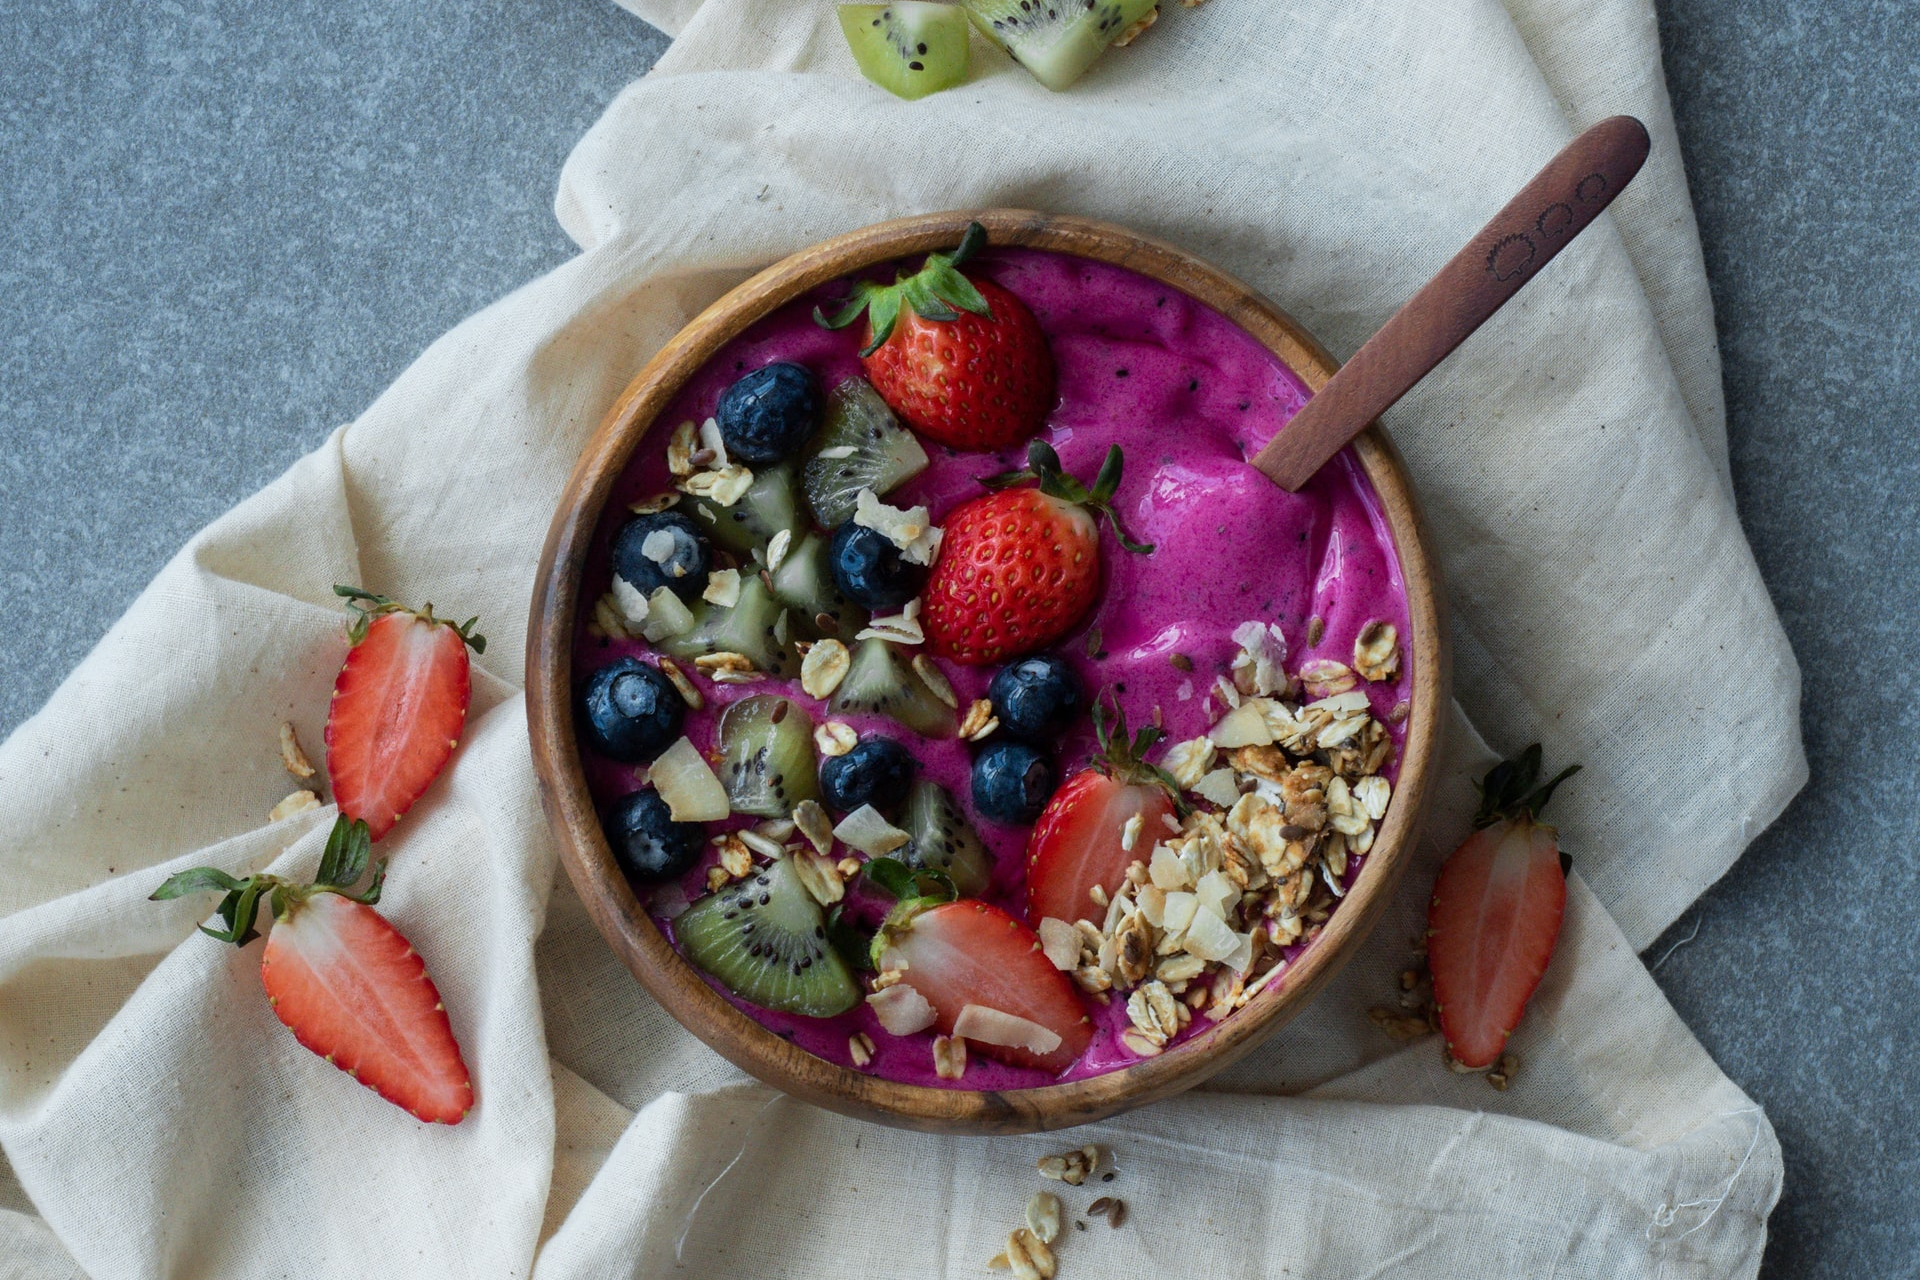 Delicious Meets Nutritious at Senberry Bowls in Fairfax